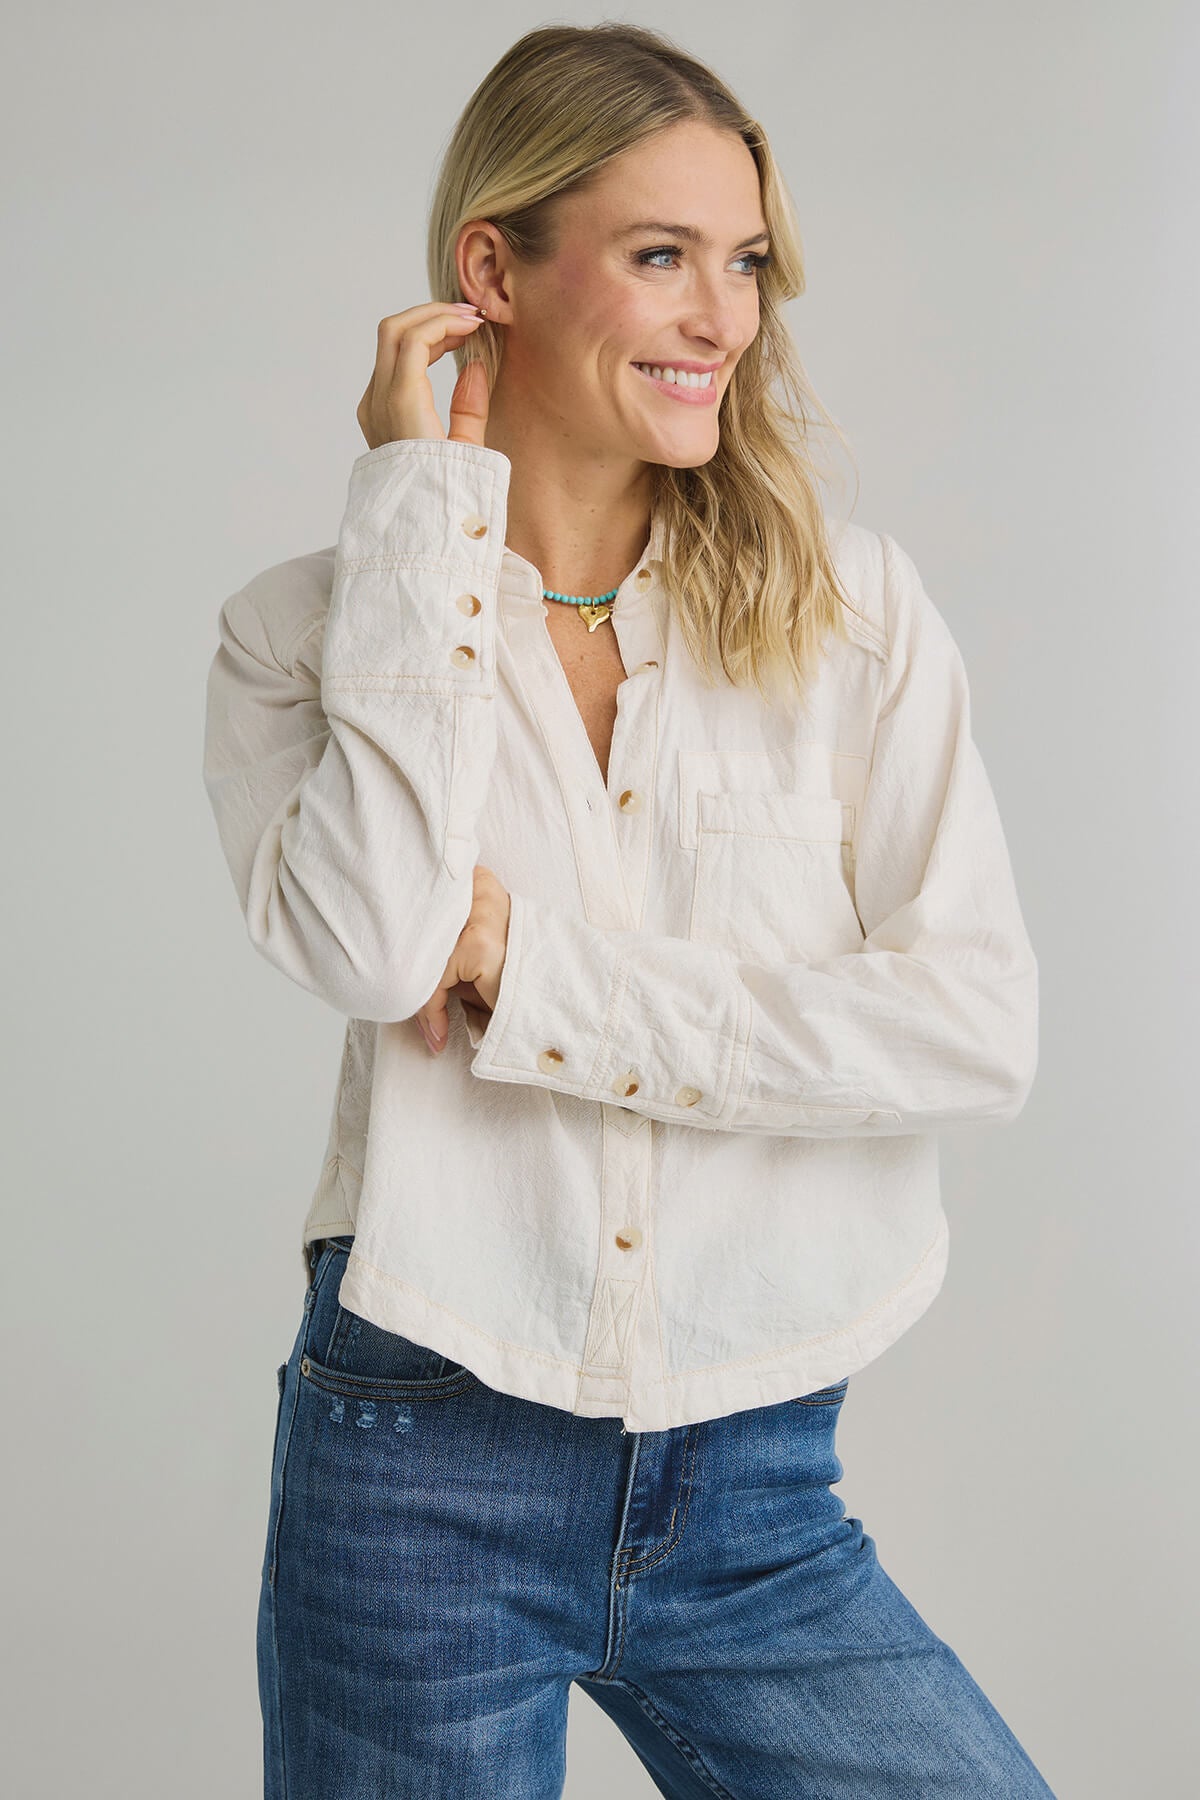 Free People Classic Oxford Top